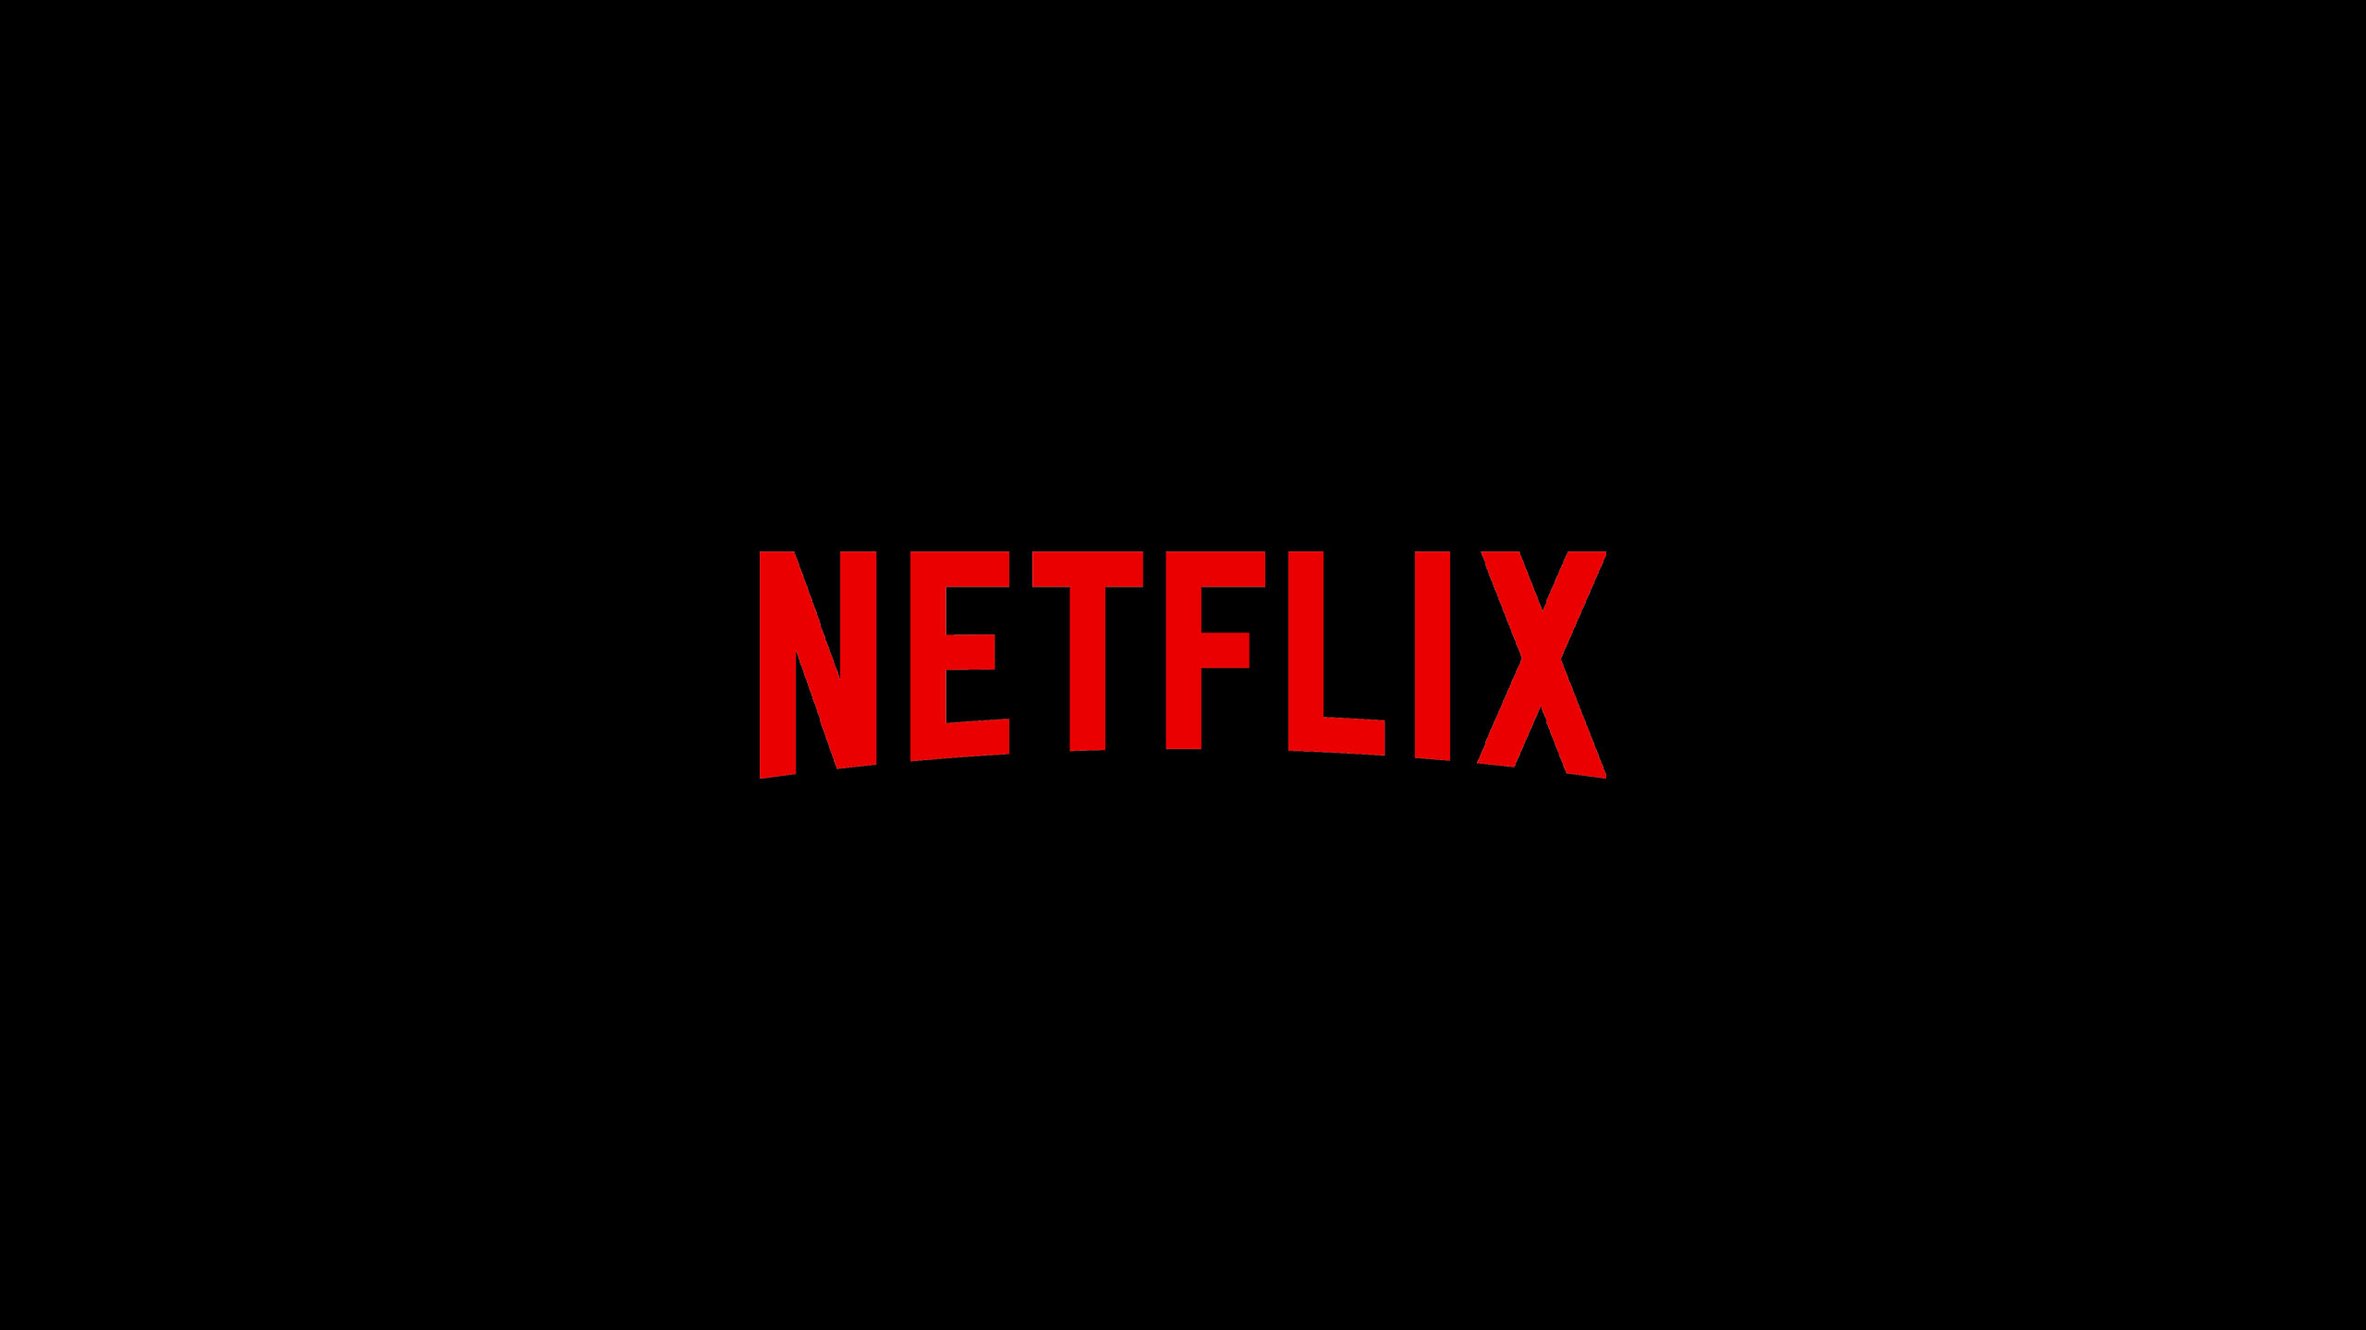 Casting For The Netflix Feature Film Thunder Force Starring Melissa McCarthy and Octavia Spencer!